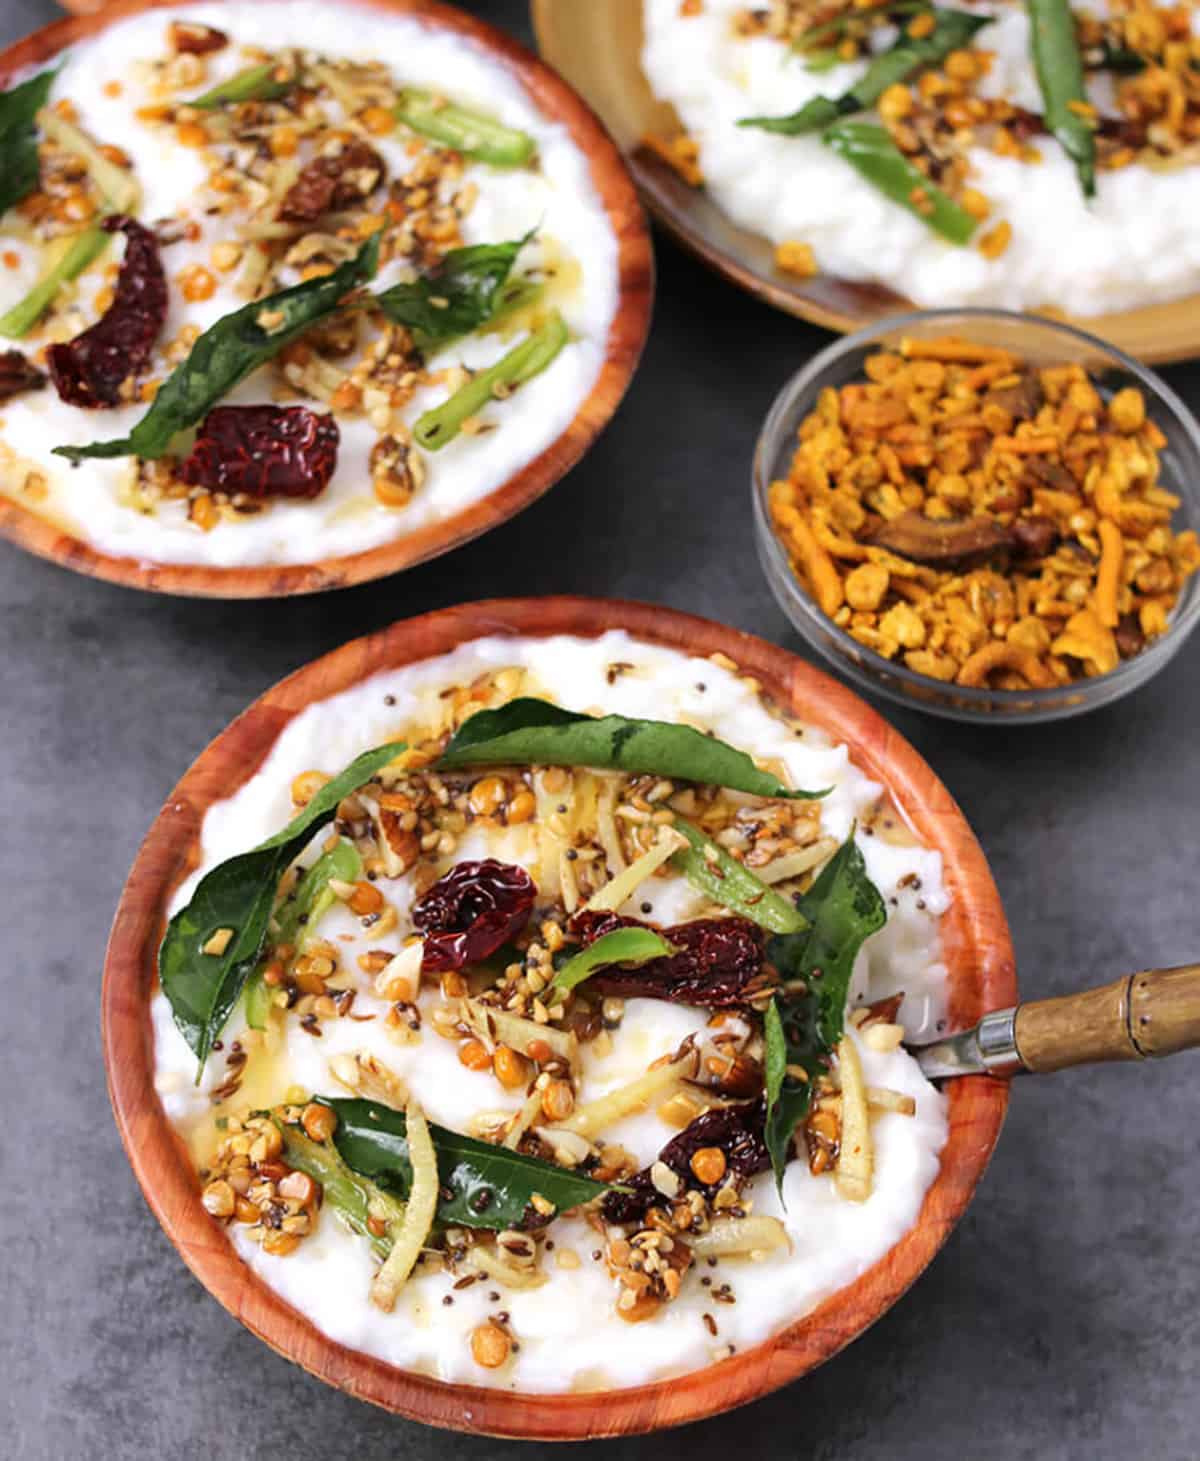 Hotel style or restaurant style curd rice (dahi chawal or mosaranna) in a serving bowl with tadka.